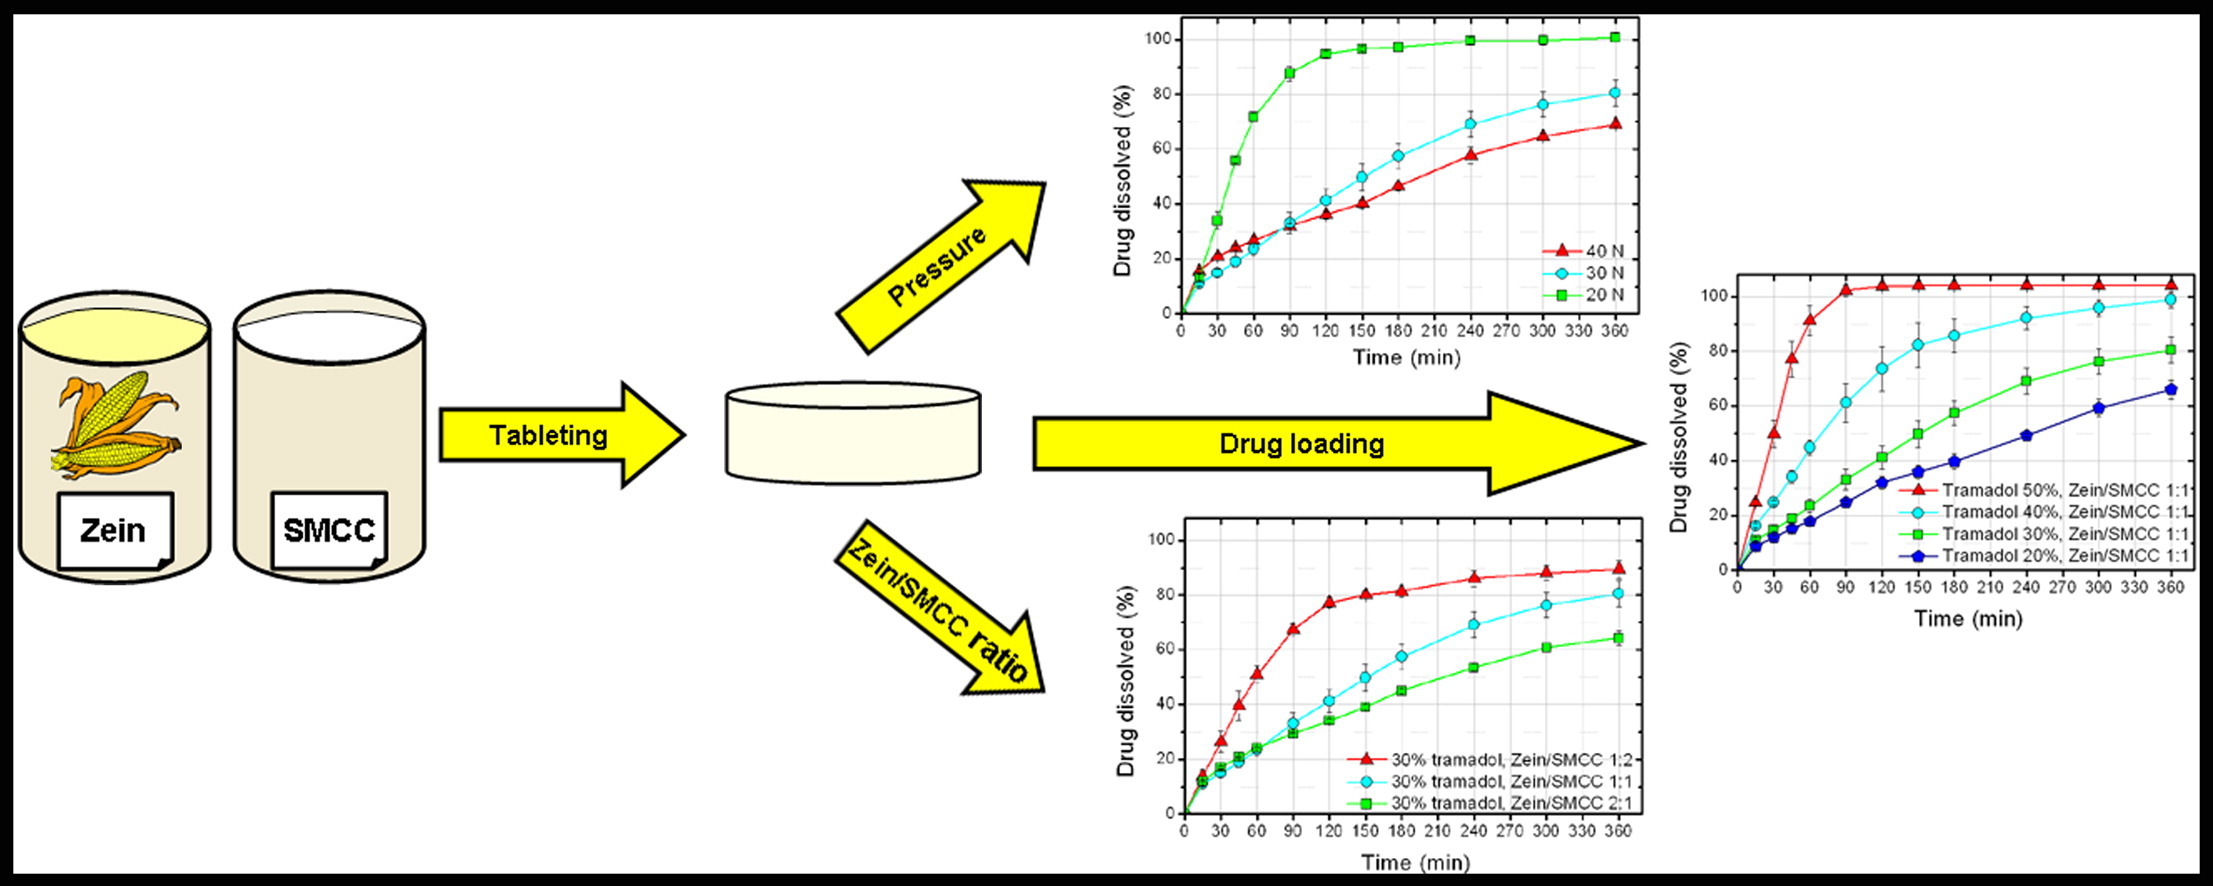 Formulation, swelling and dissolution kinetics study of zein based matrix tablets